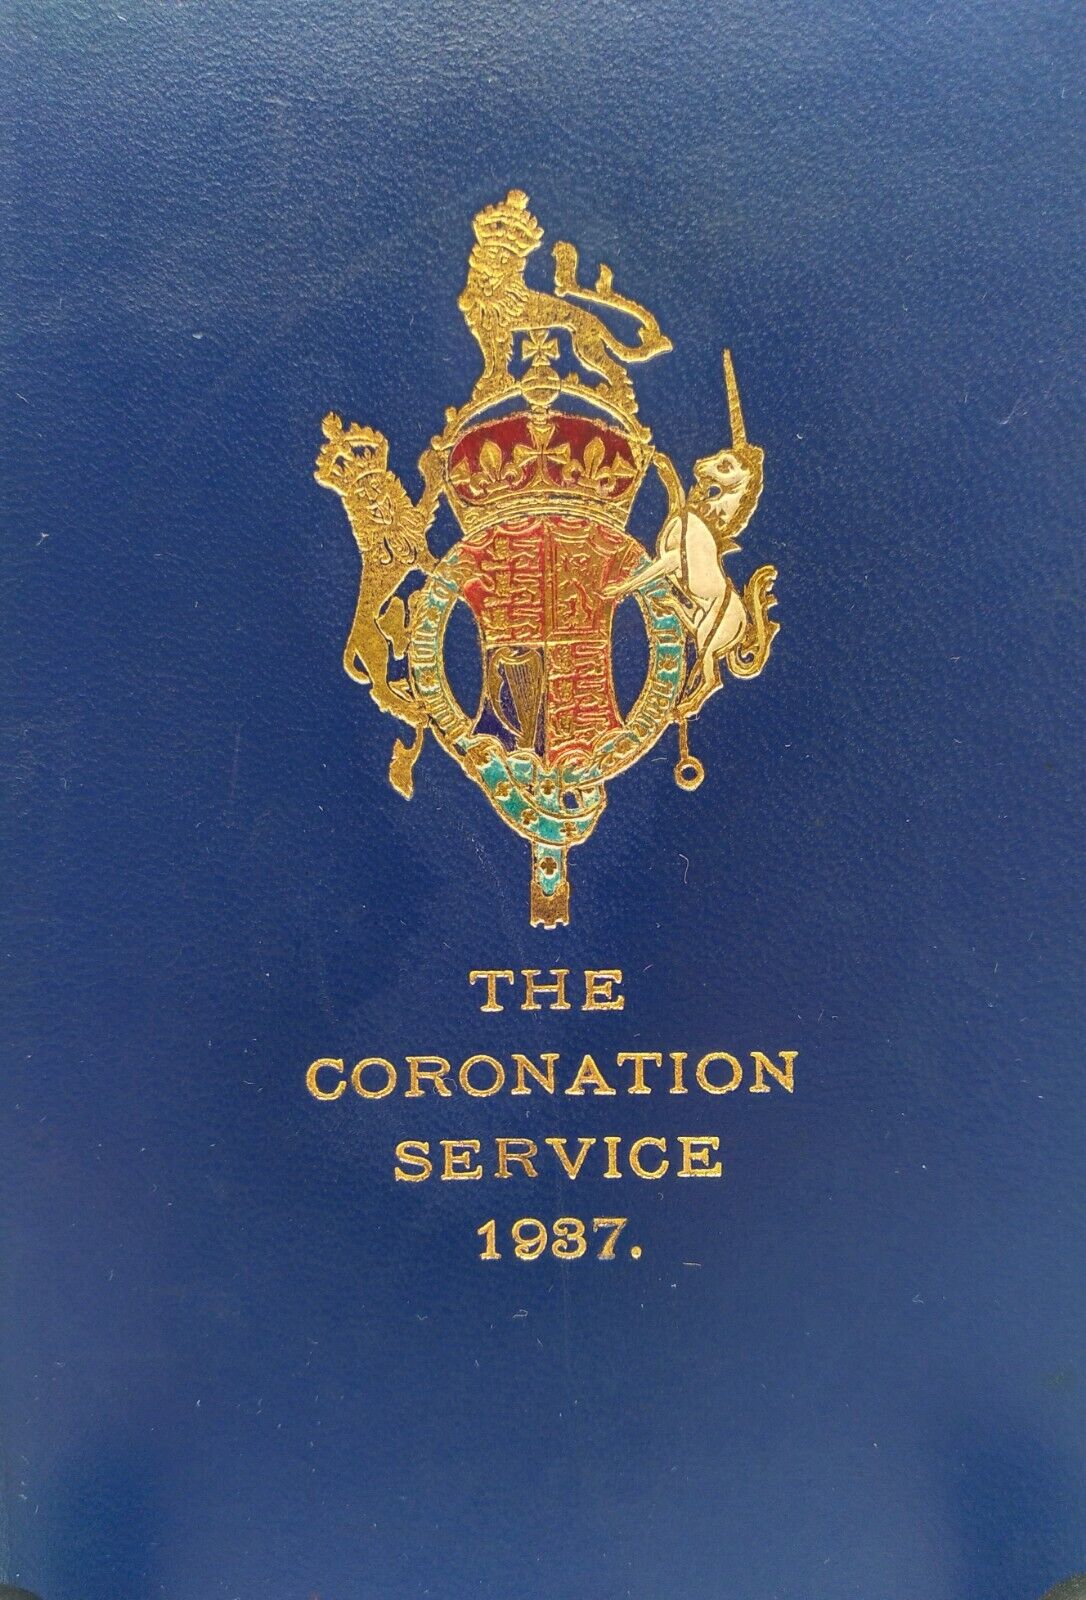 THE CORONATION SERVICE 1937☆KING GEORGE VI & QUEEN ELIZABETH☆WESTMINSTER ☆RARE